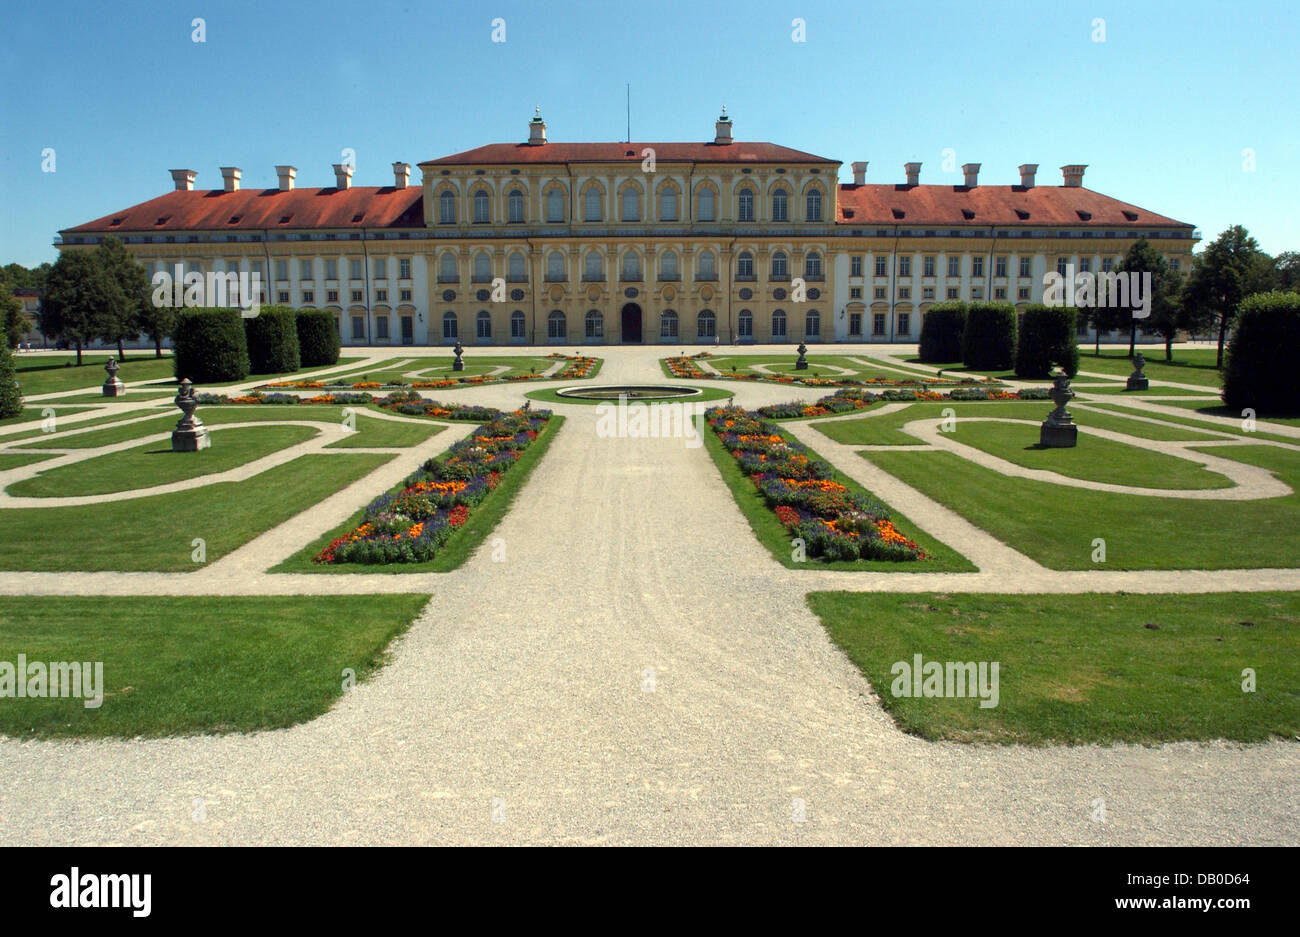 The Neue Schloss (New Palace) is pictured in Schleissheim, Germany,  23 July 2007. The palace was built by order of Bavarian Elector Maximilian II Emanuel. Photo: Horst Ossinger Stock Photo